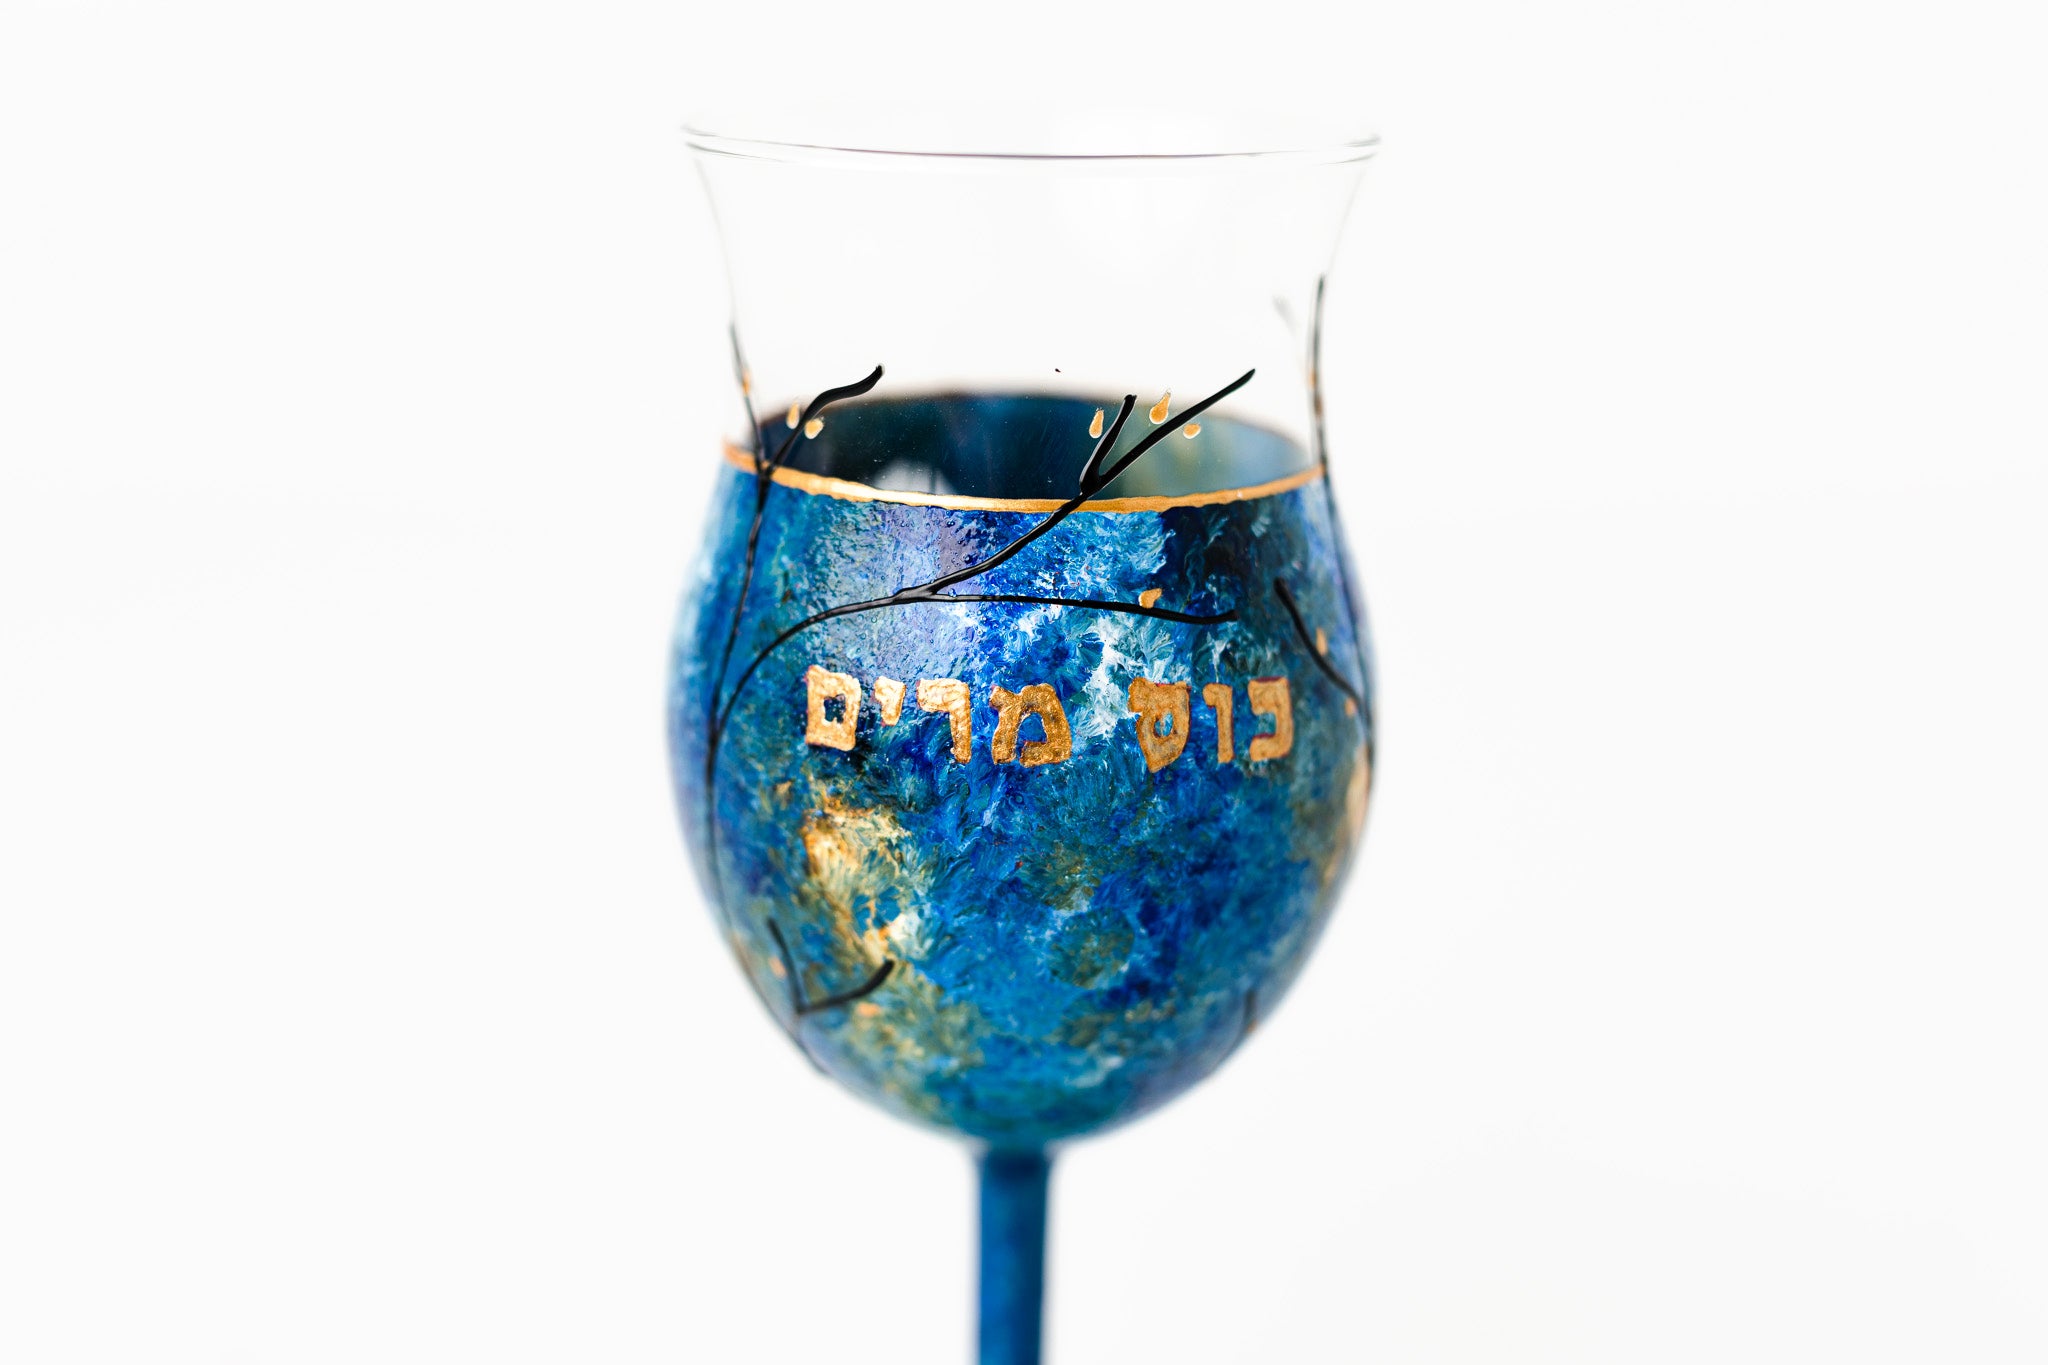 Miriam's Cup- Painted glass in shades of ocean blue